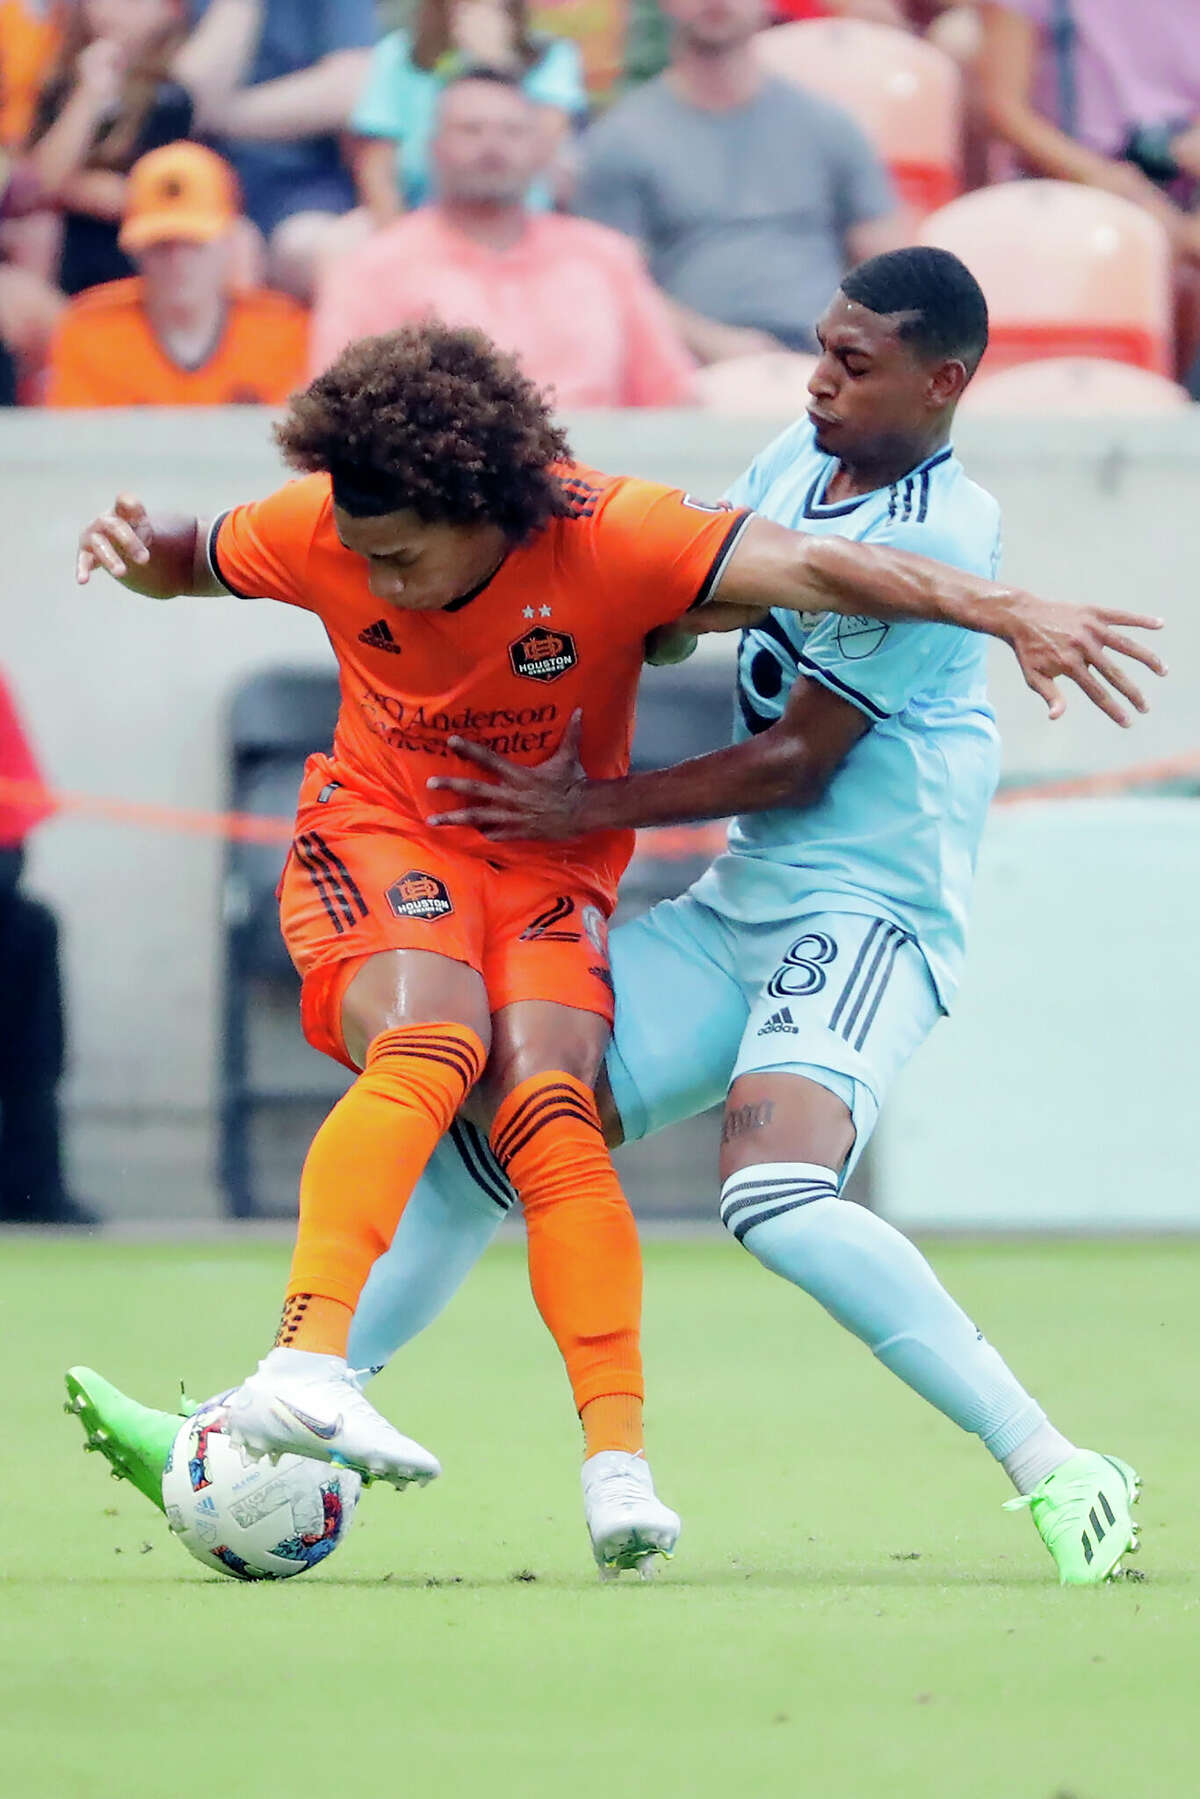 Houston Dynamo midfielder Adalberto Carrasquilla, left, loses the ball on a steal by Minnesota United midfielder Joseph Rosales (8) during the first half of an MLS soccer match Saturday, July 23, 2022, in Houston. (AP Photo/Michael Wyke)